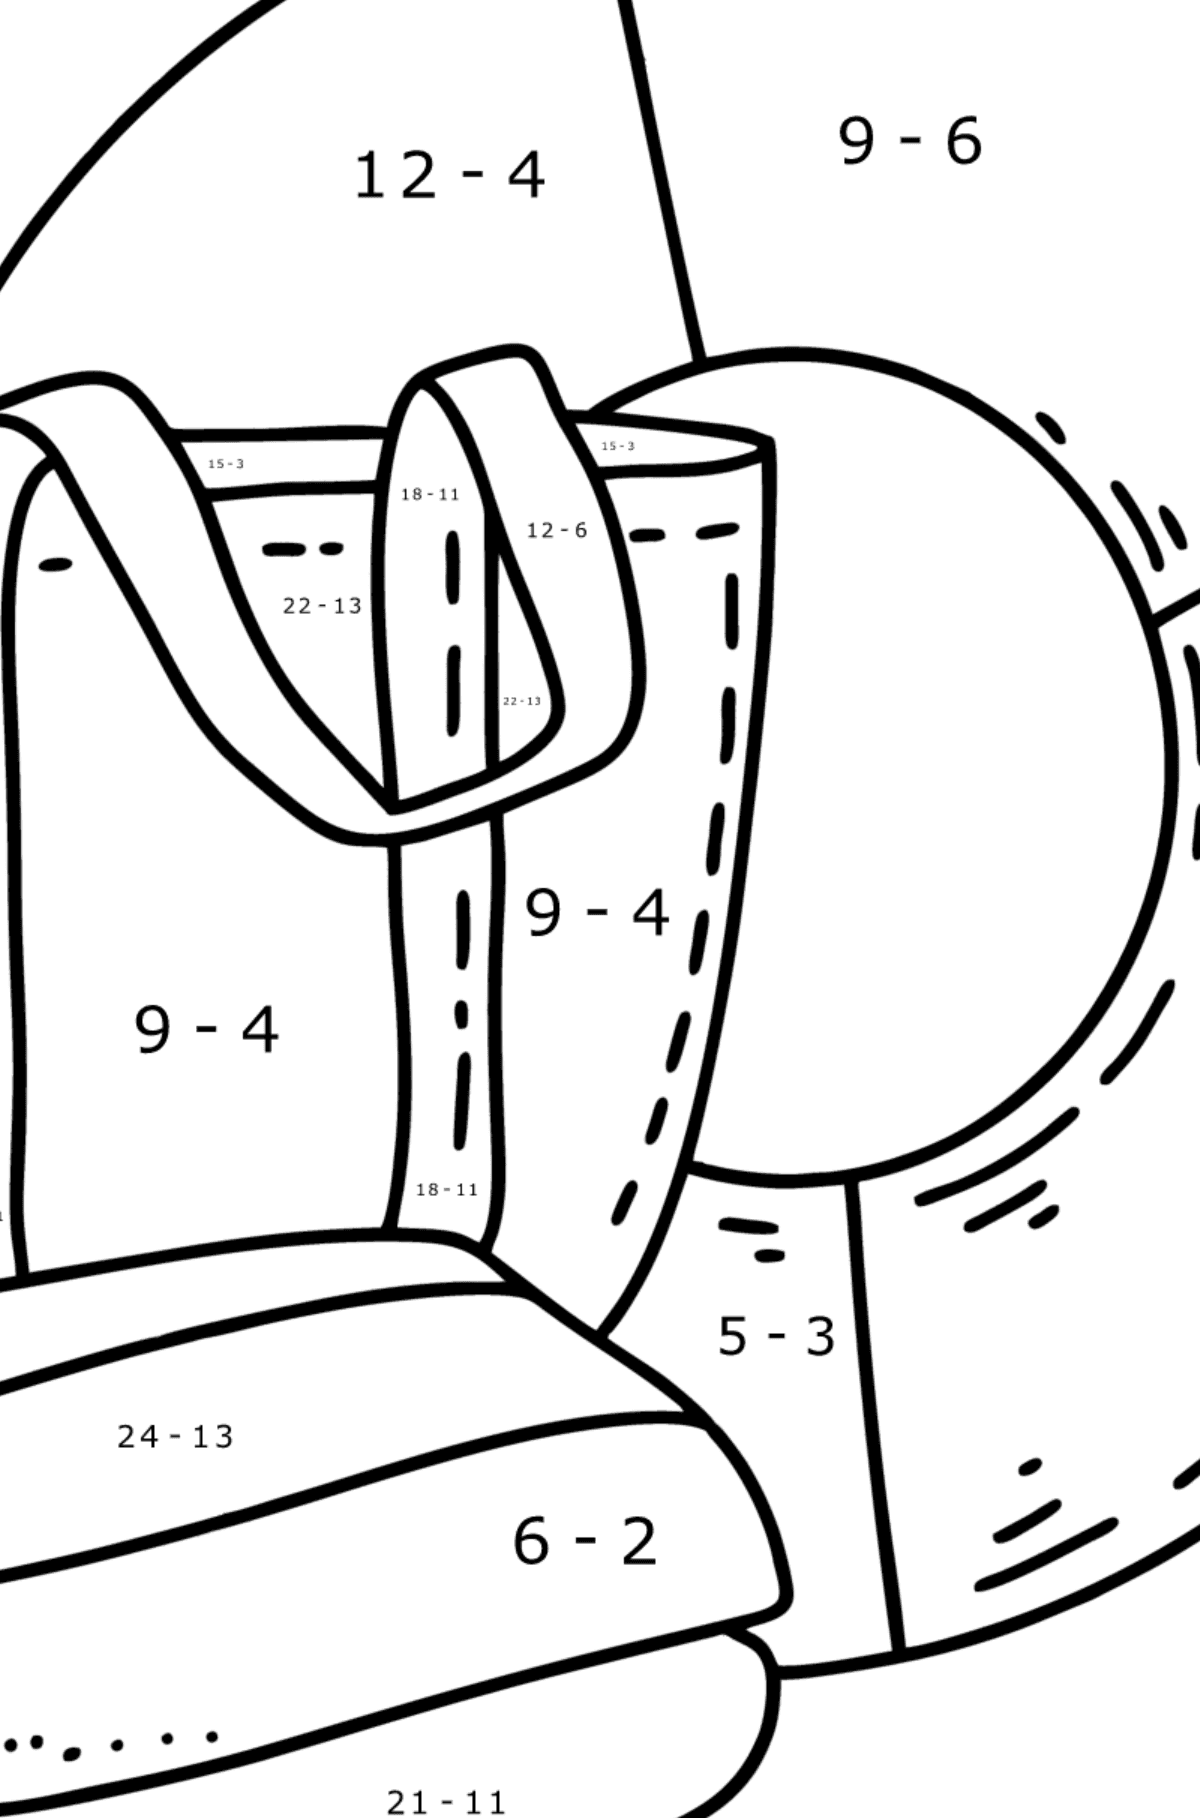 Coloring page Beach: bag and lifebuoy - Math Coloring - Subtraction for Kids